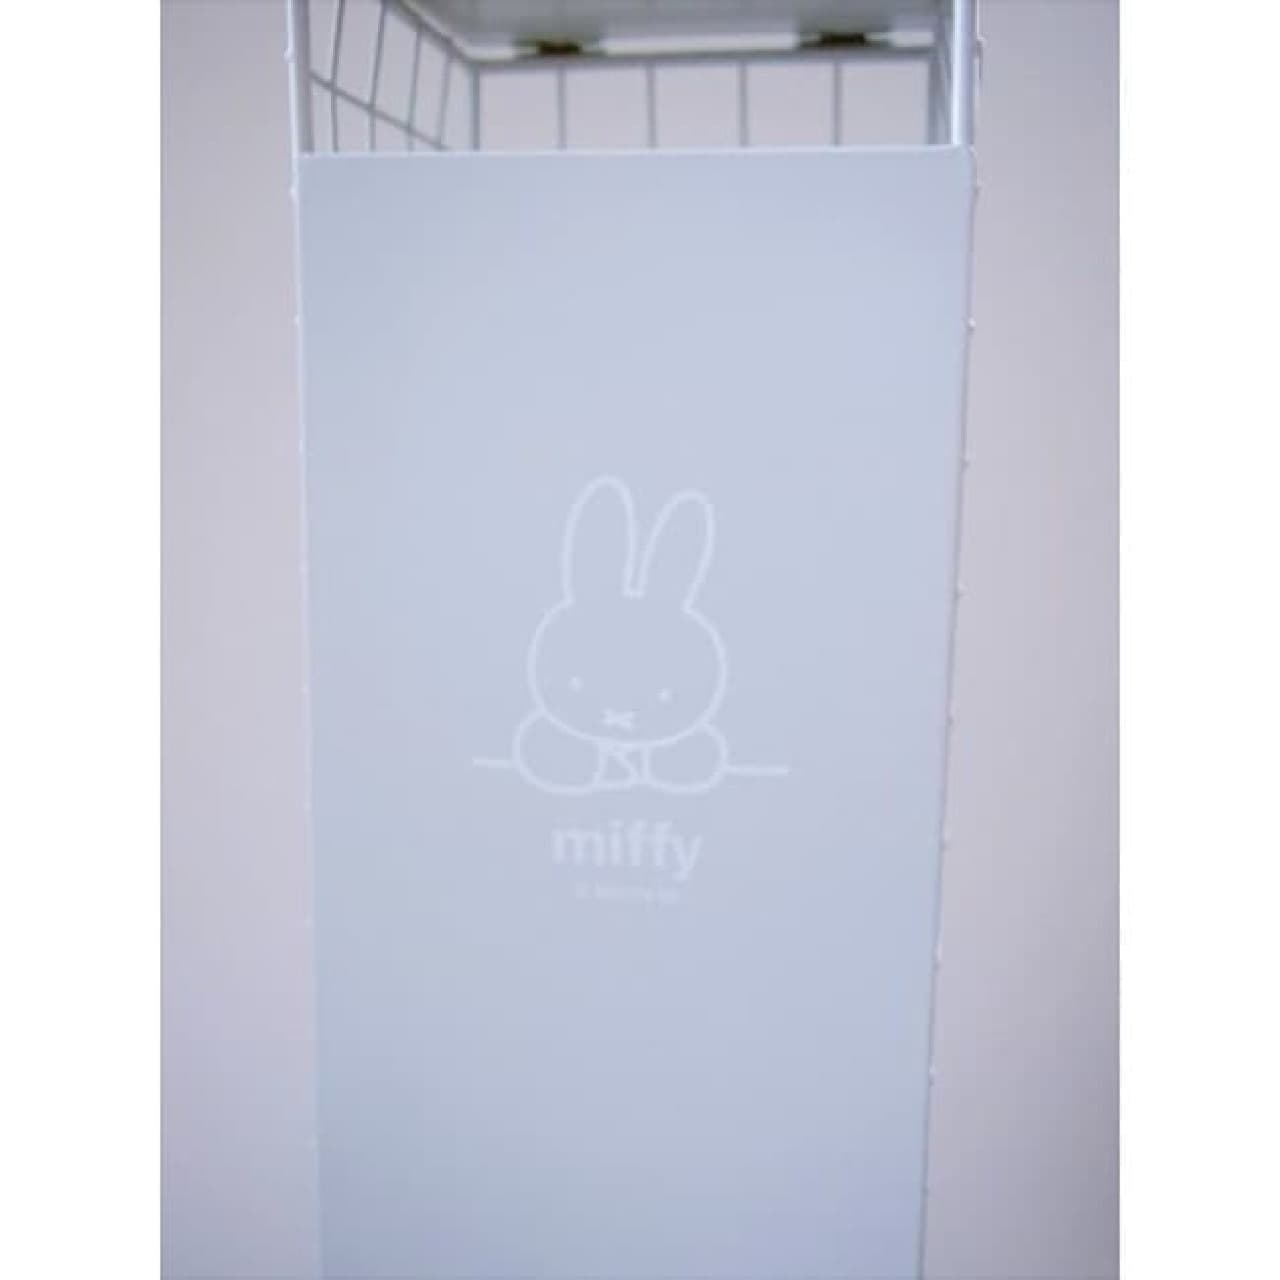 Cute toilet paper stocker with miffy pattern